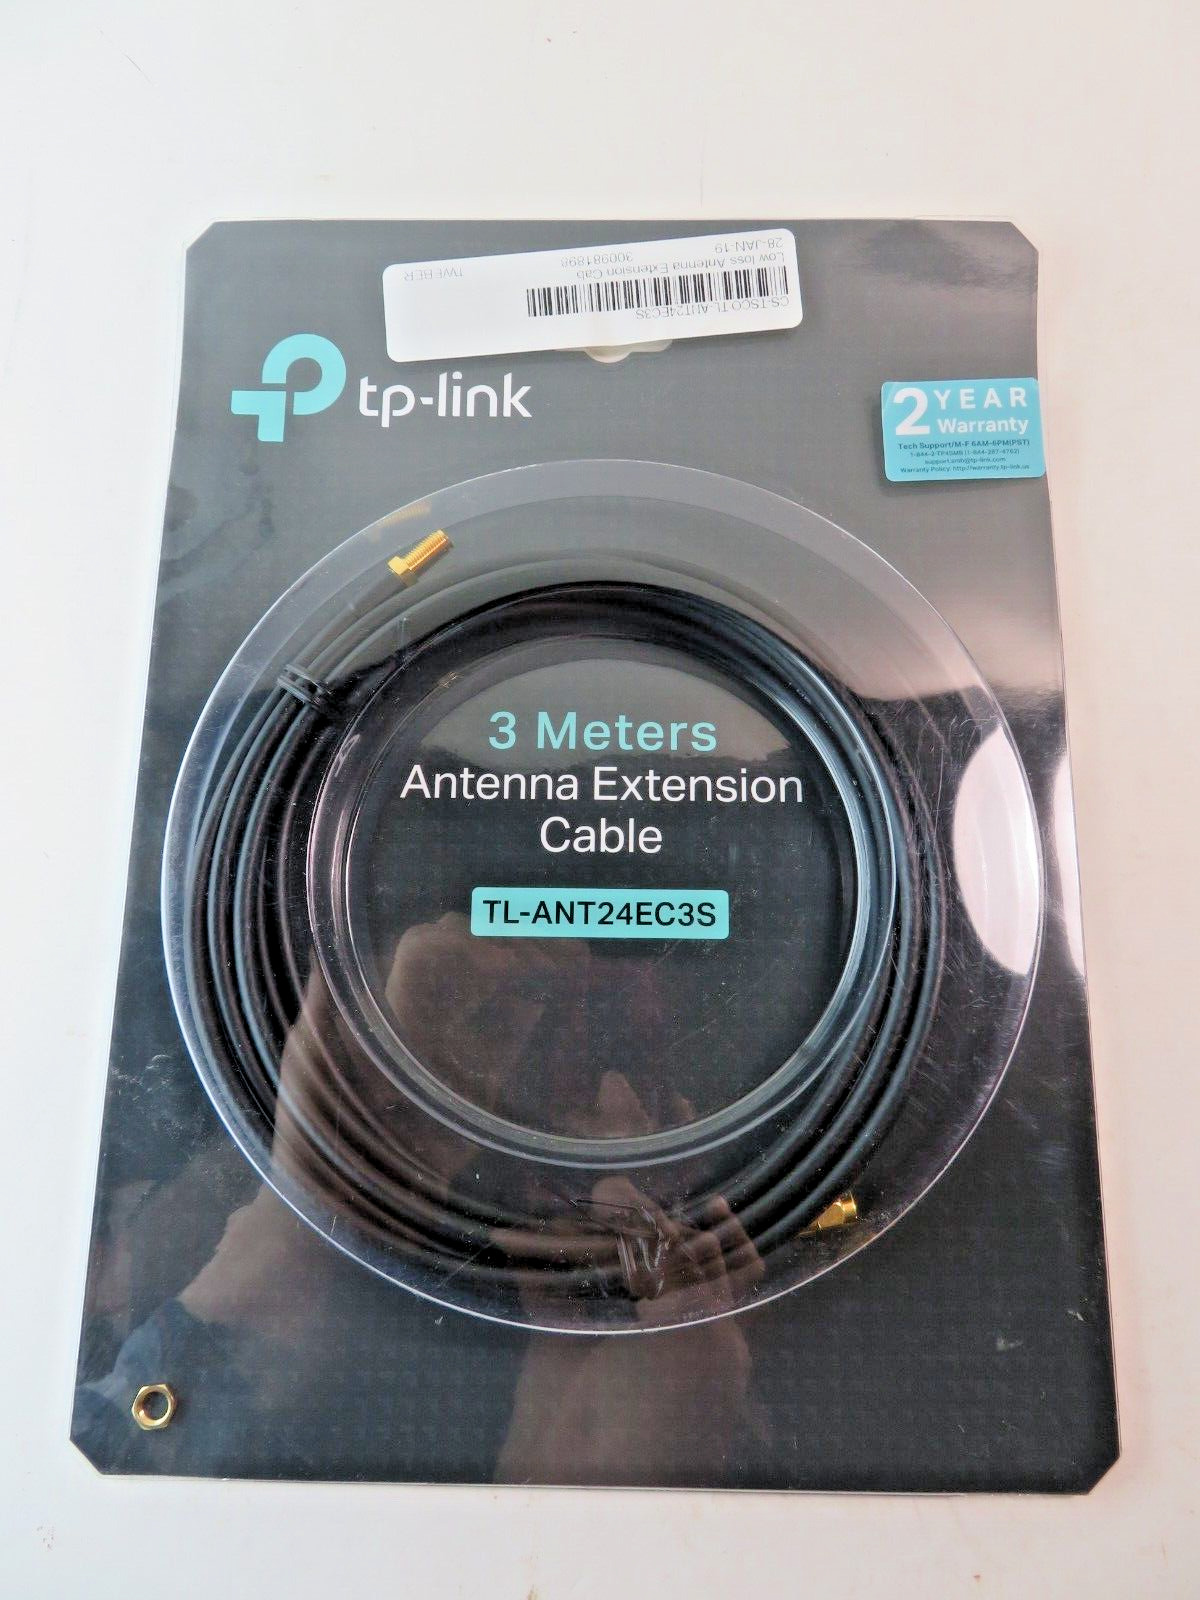 Tp Link Tl-ANT24EC3S 3 Meter Antenna Extension Cable